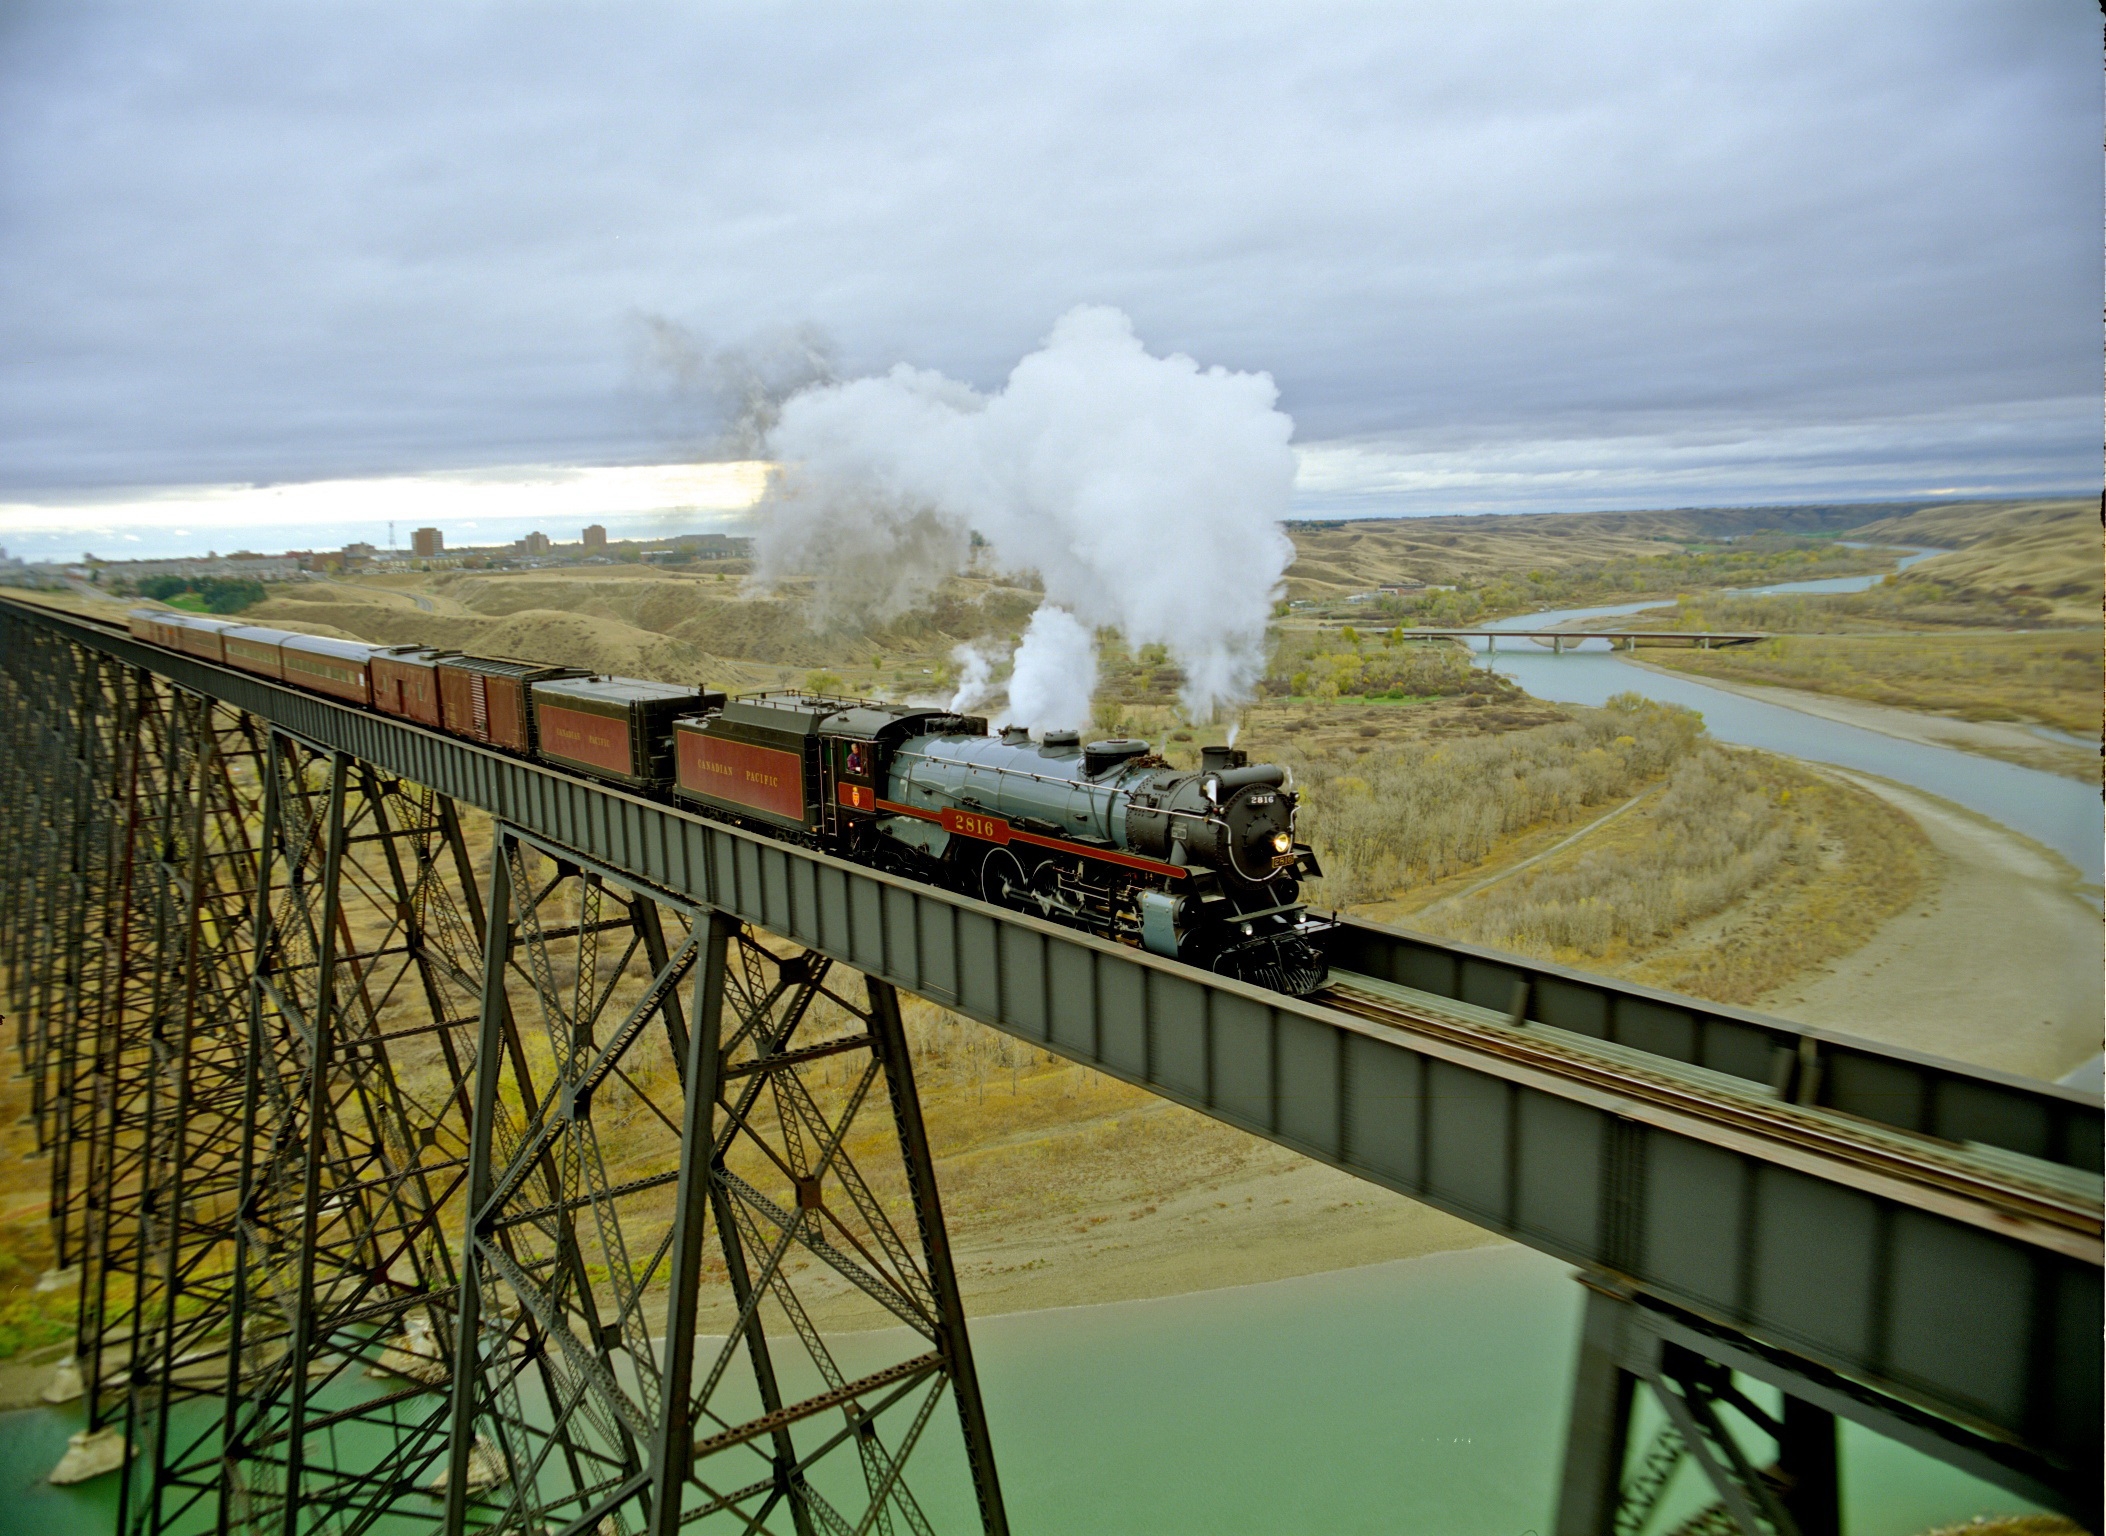 The tallest railway bridges in the world were constructed to gain elevation